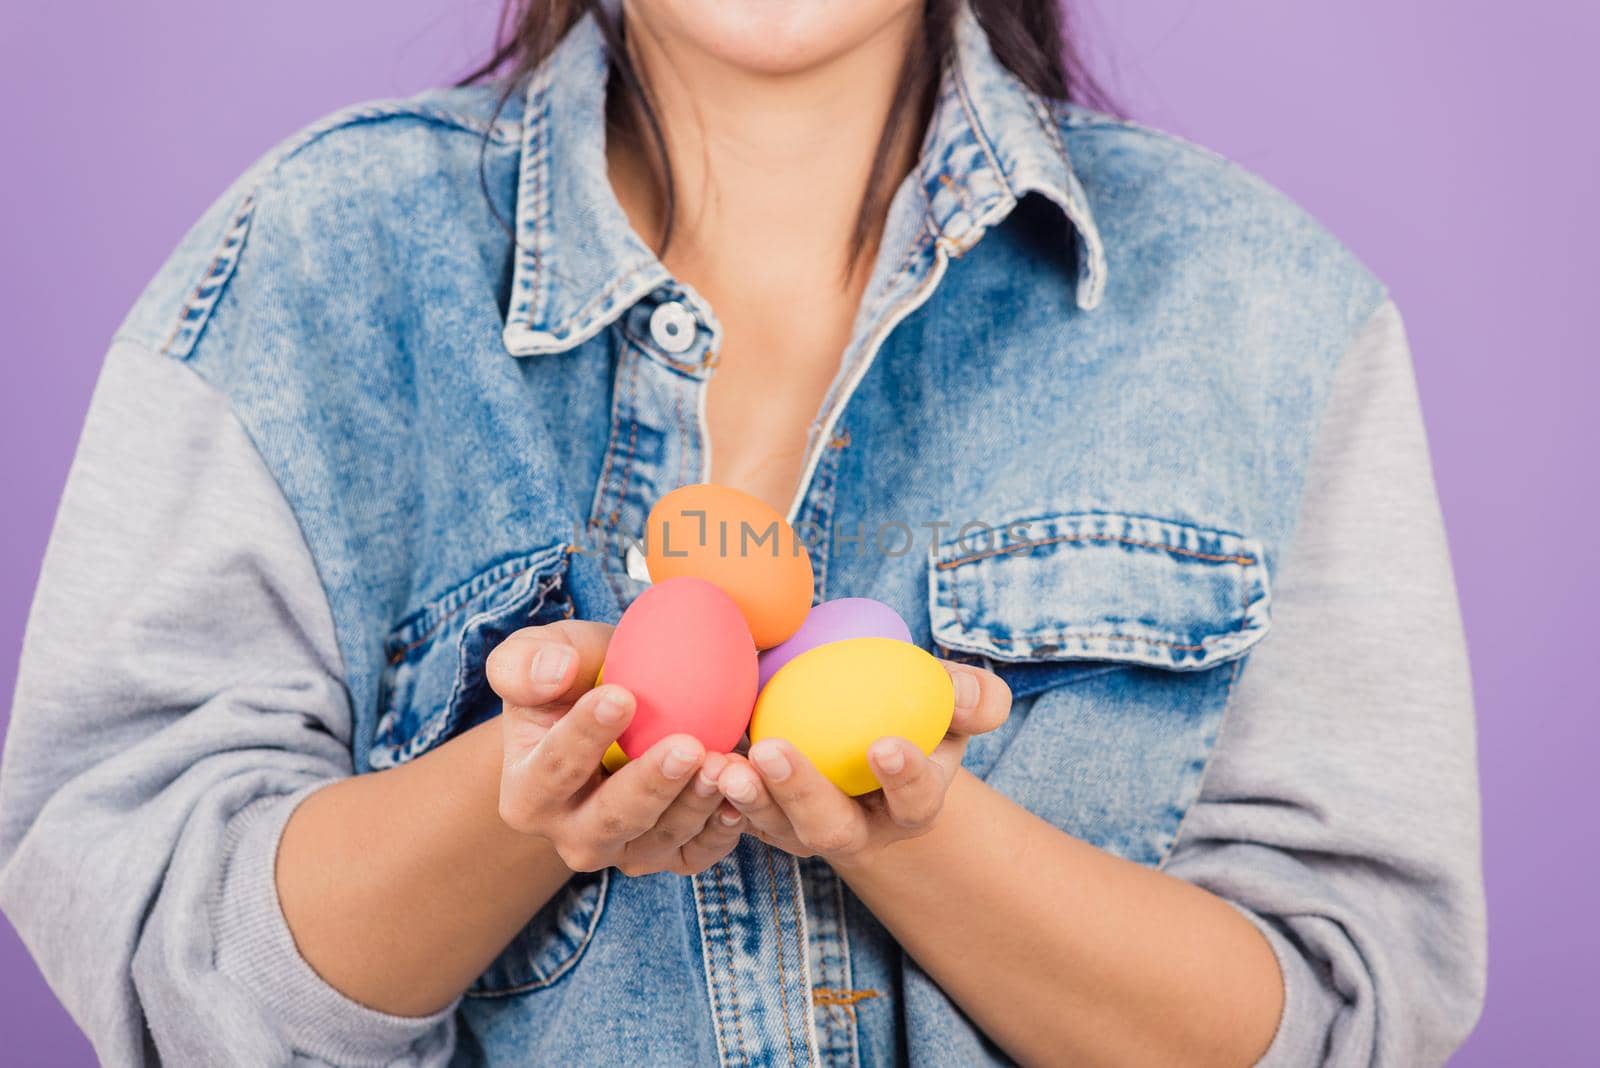 Happy Easter concept. Beautiful young woman smiling wearing rabbit ears and denims hold colorful Easter eggs gift on hands, Portrait female looking at egg, studio shot isolated on purple background